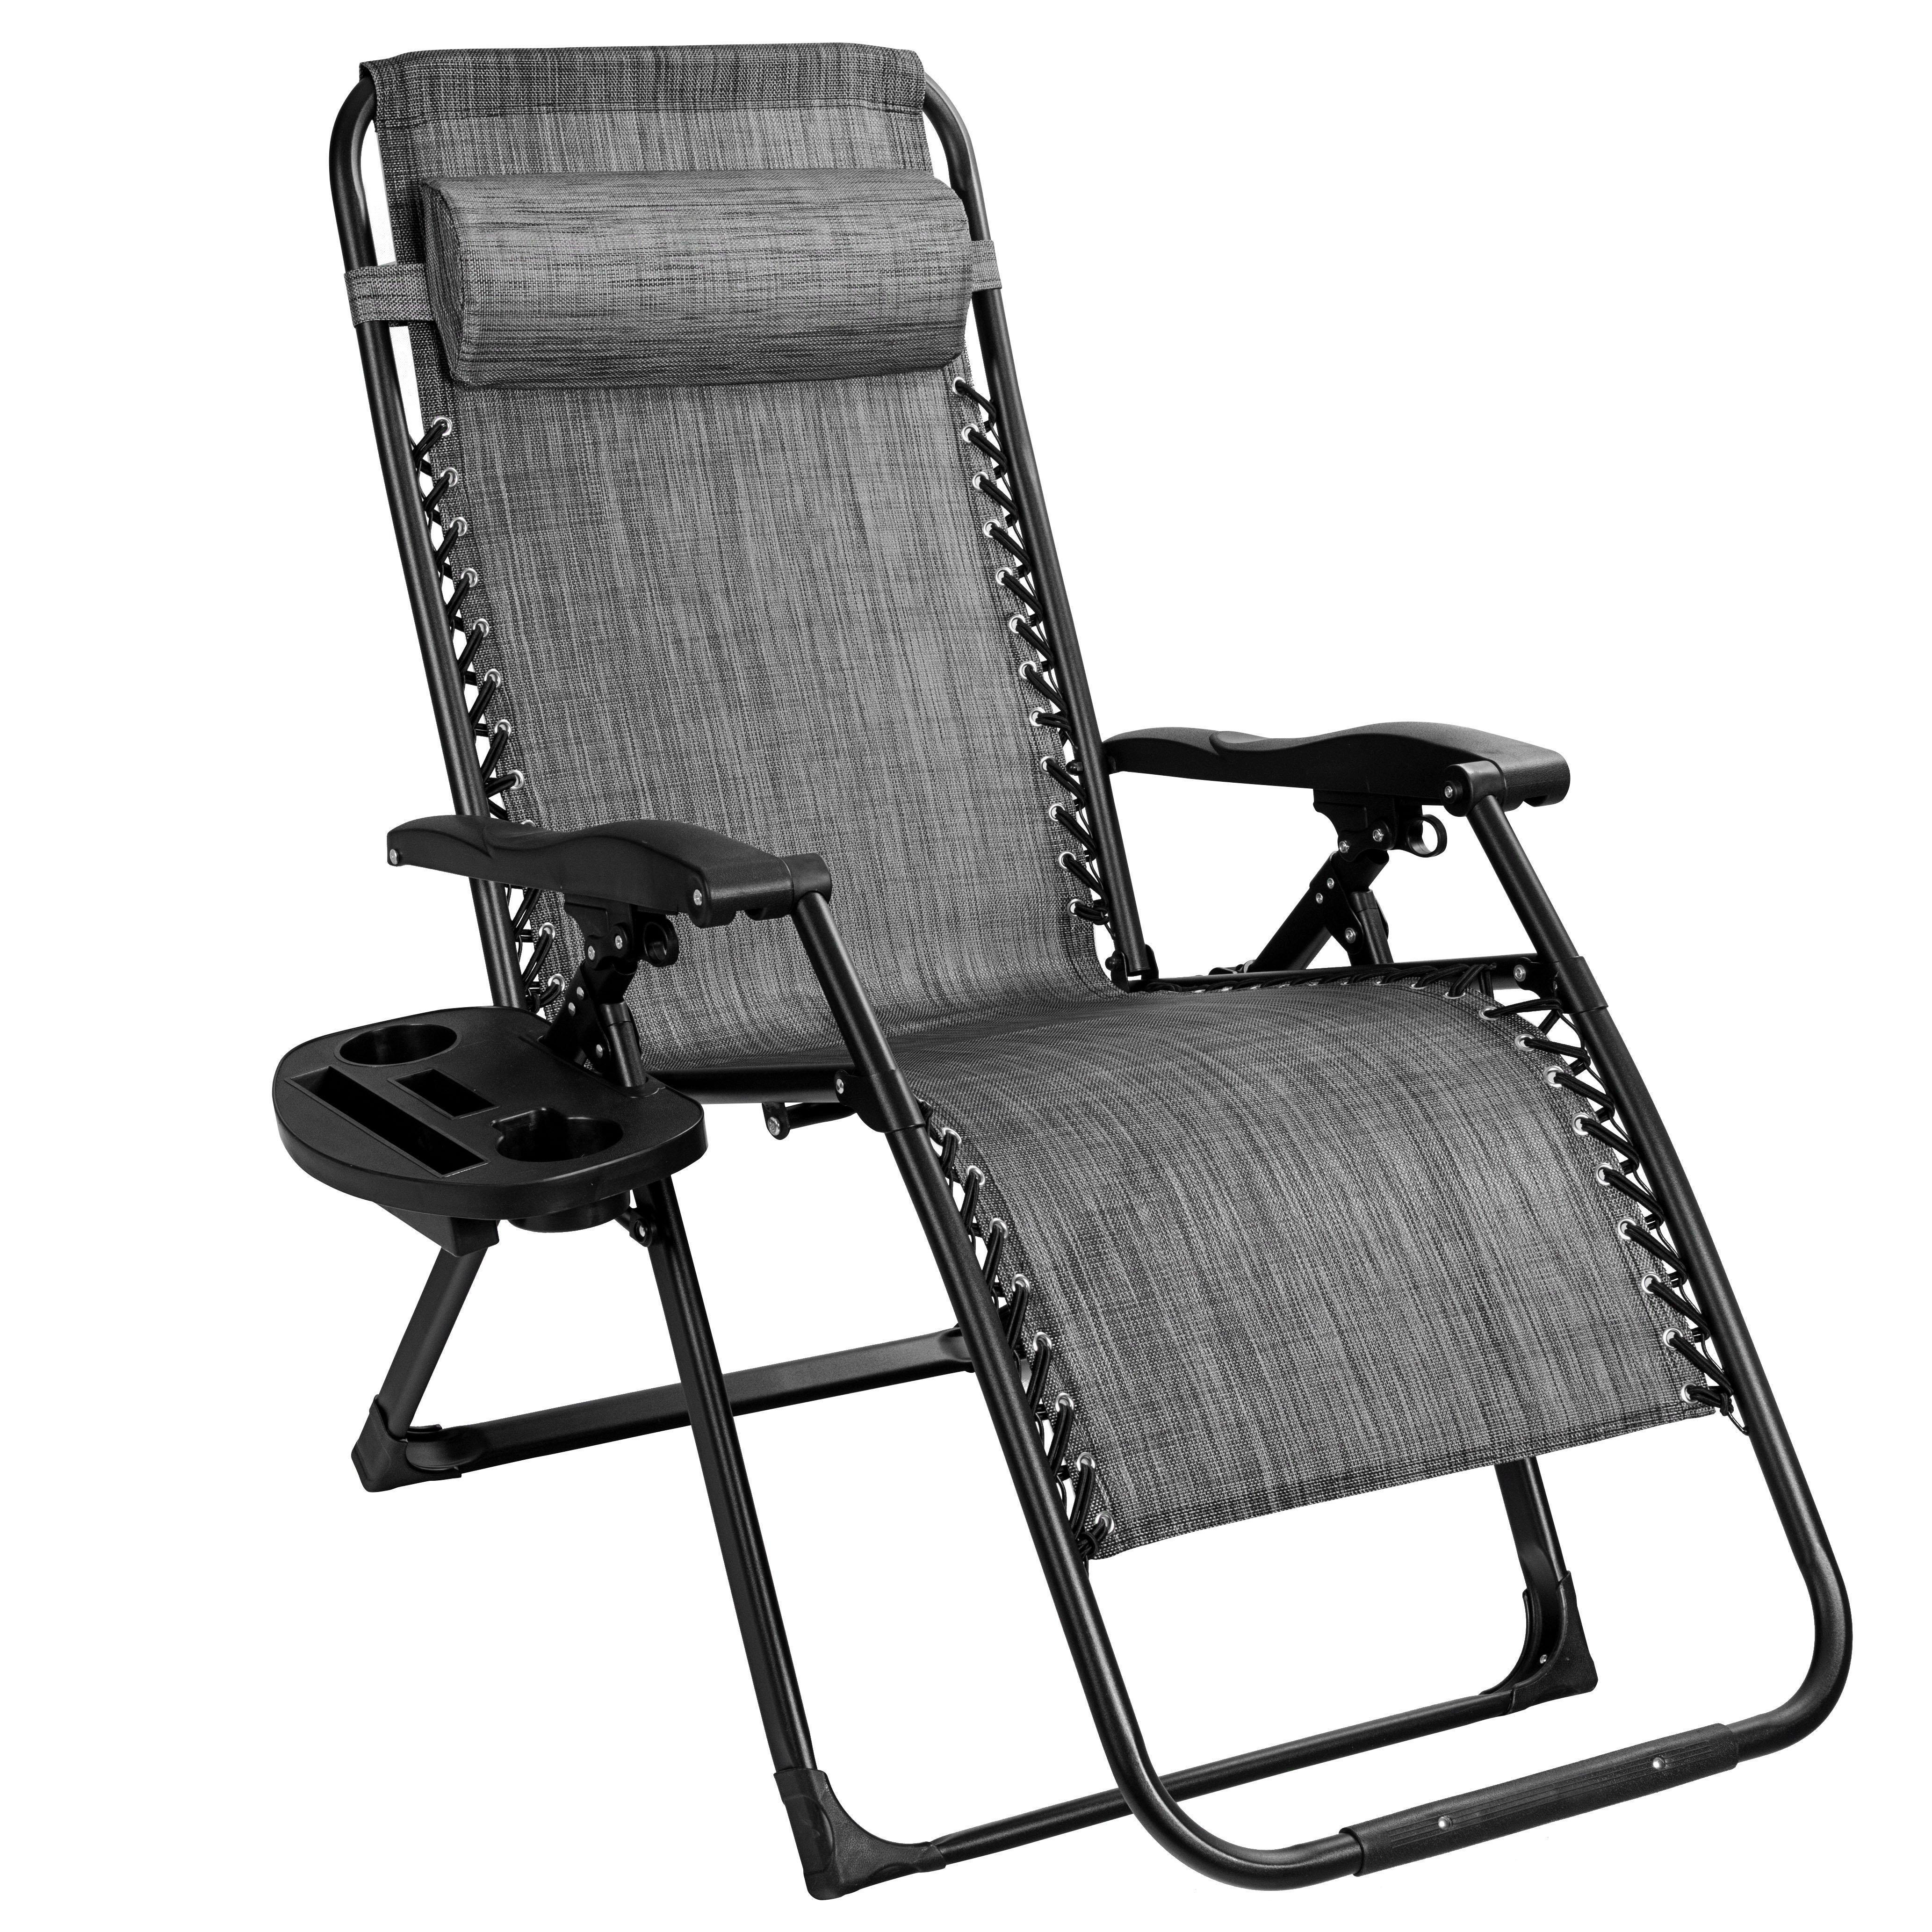 Folding Zero Gravity Chair Lounge Chaise Chair Recliner with Detachable Headrest - image 1